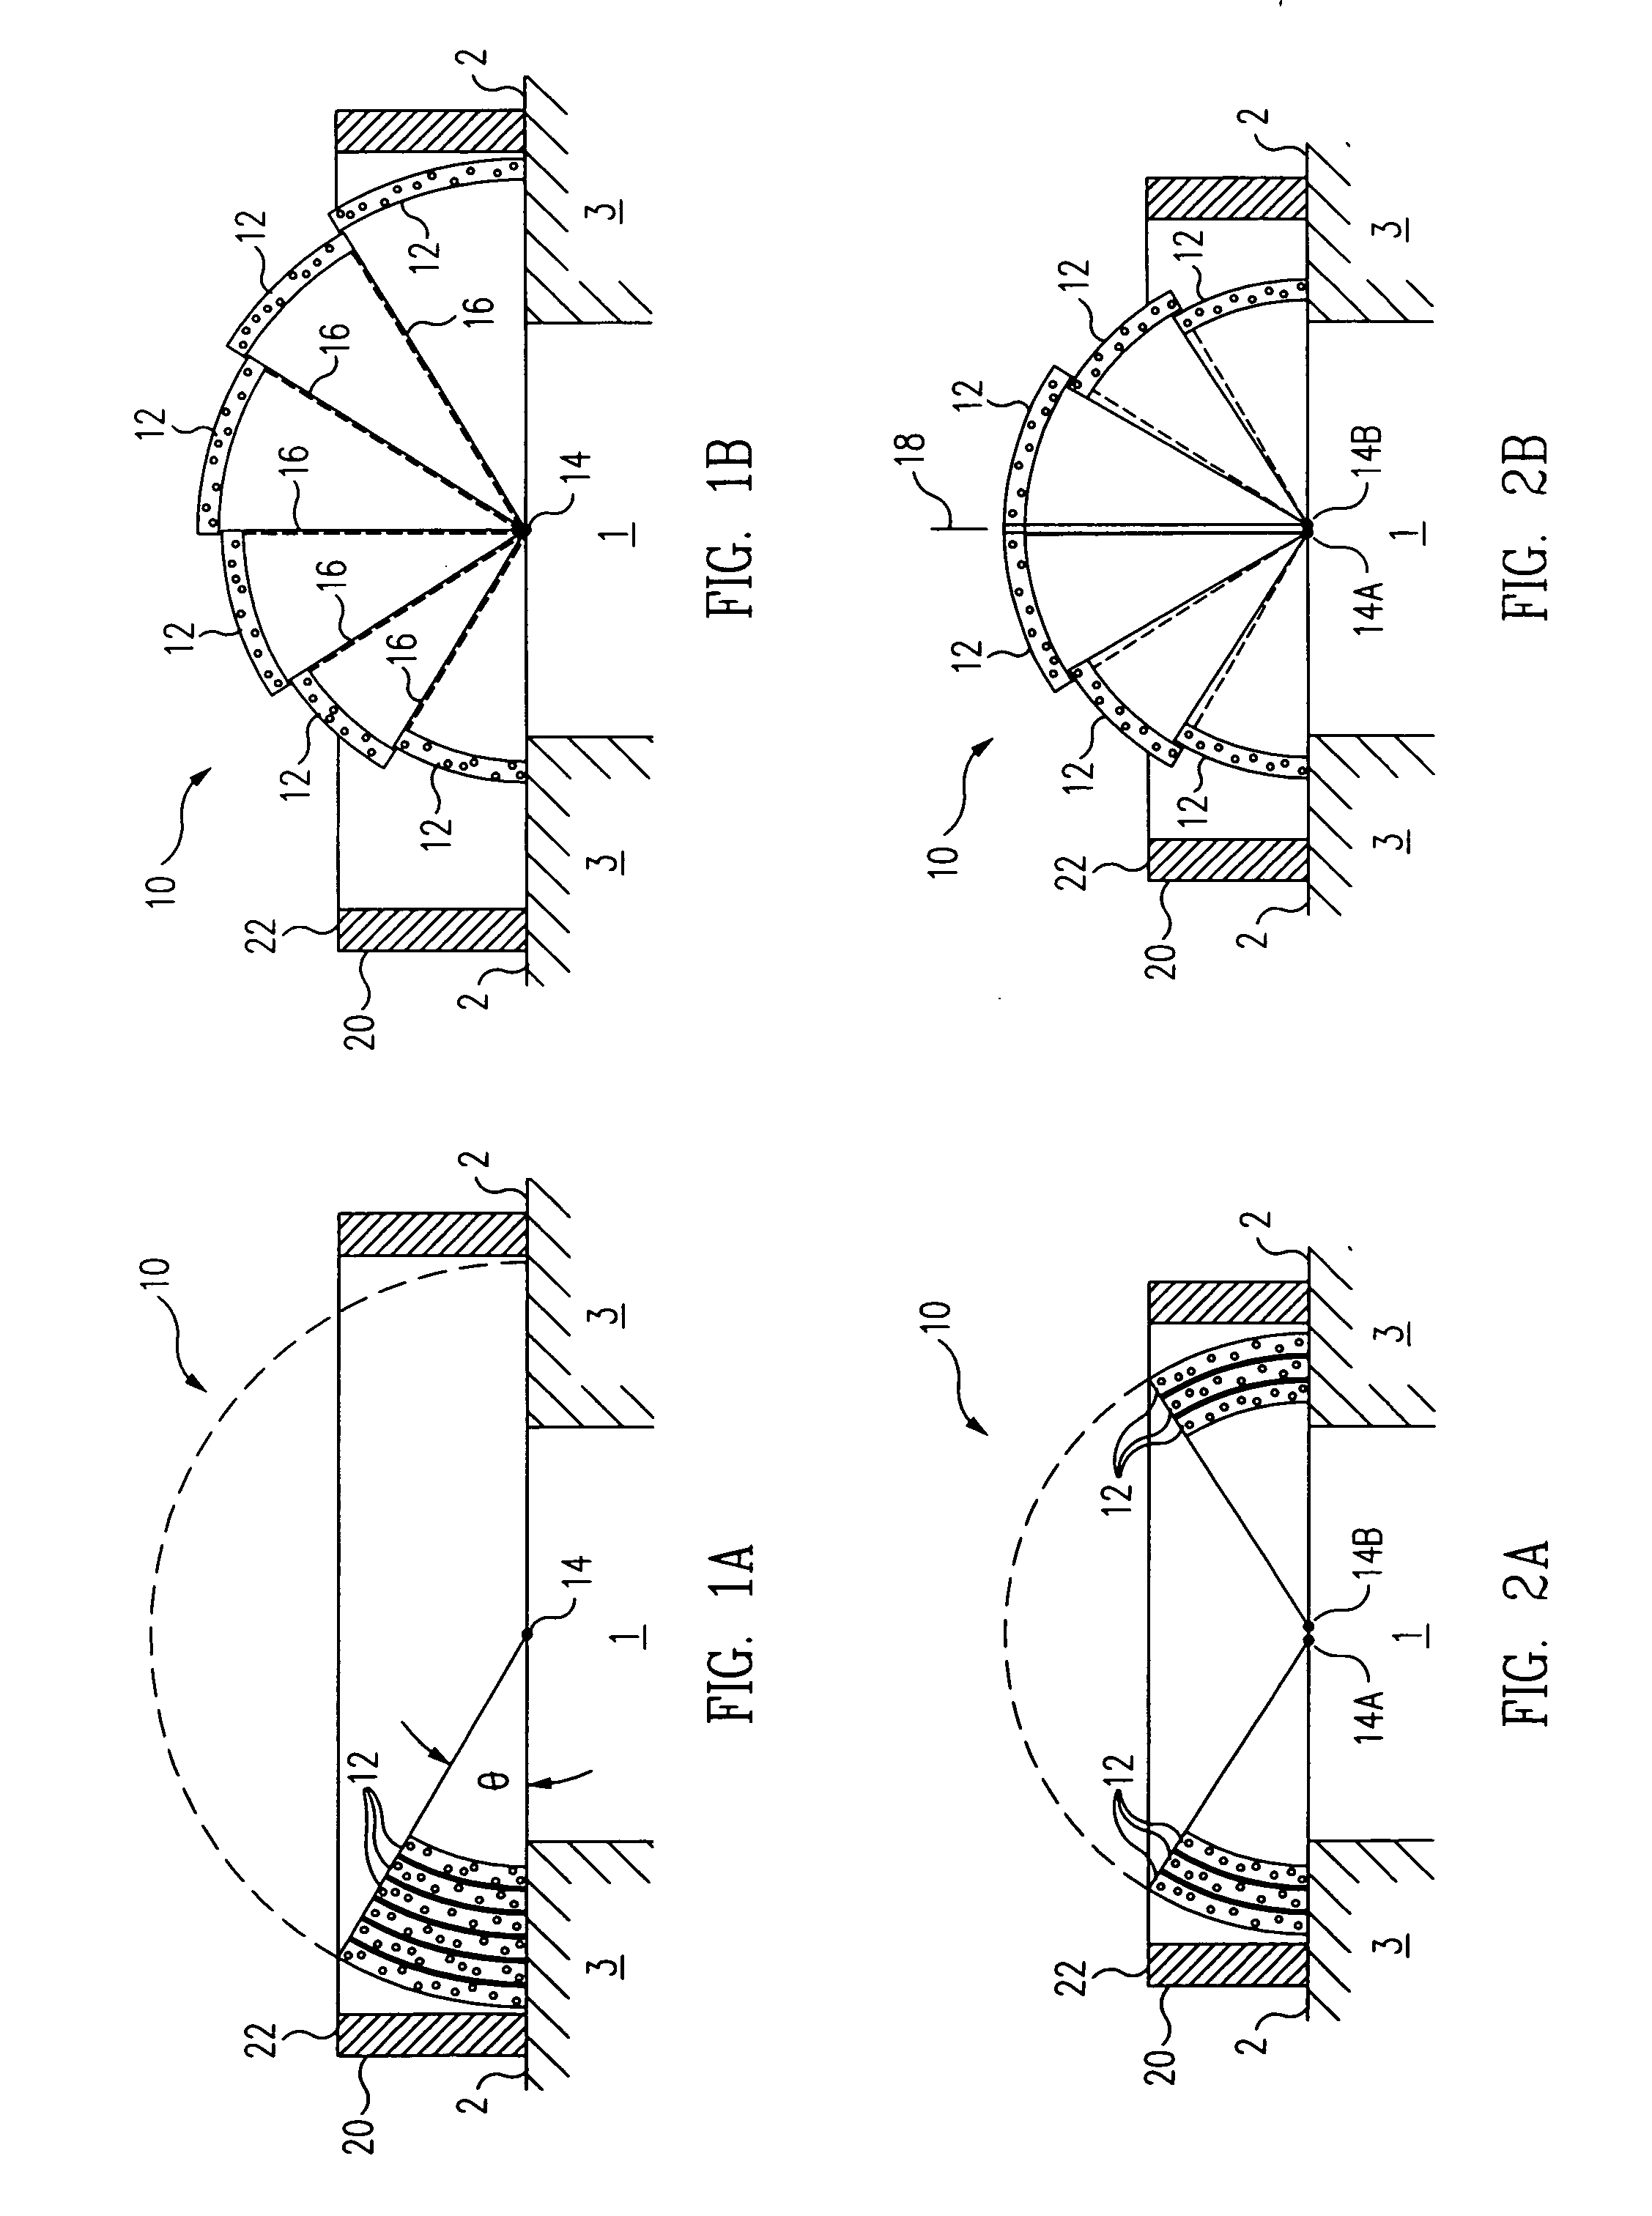 Retractable protective dome for space vehicle equipment